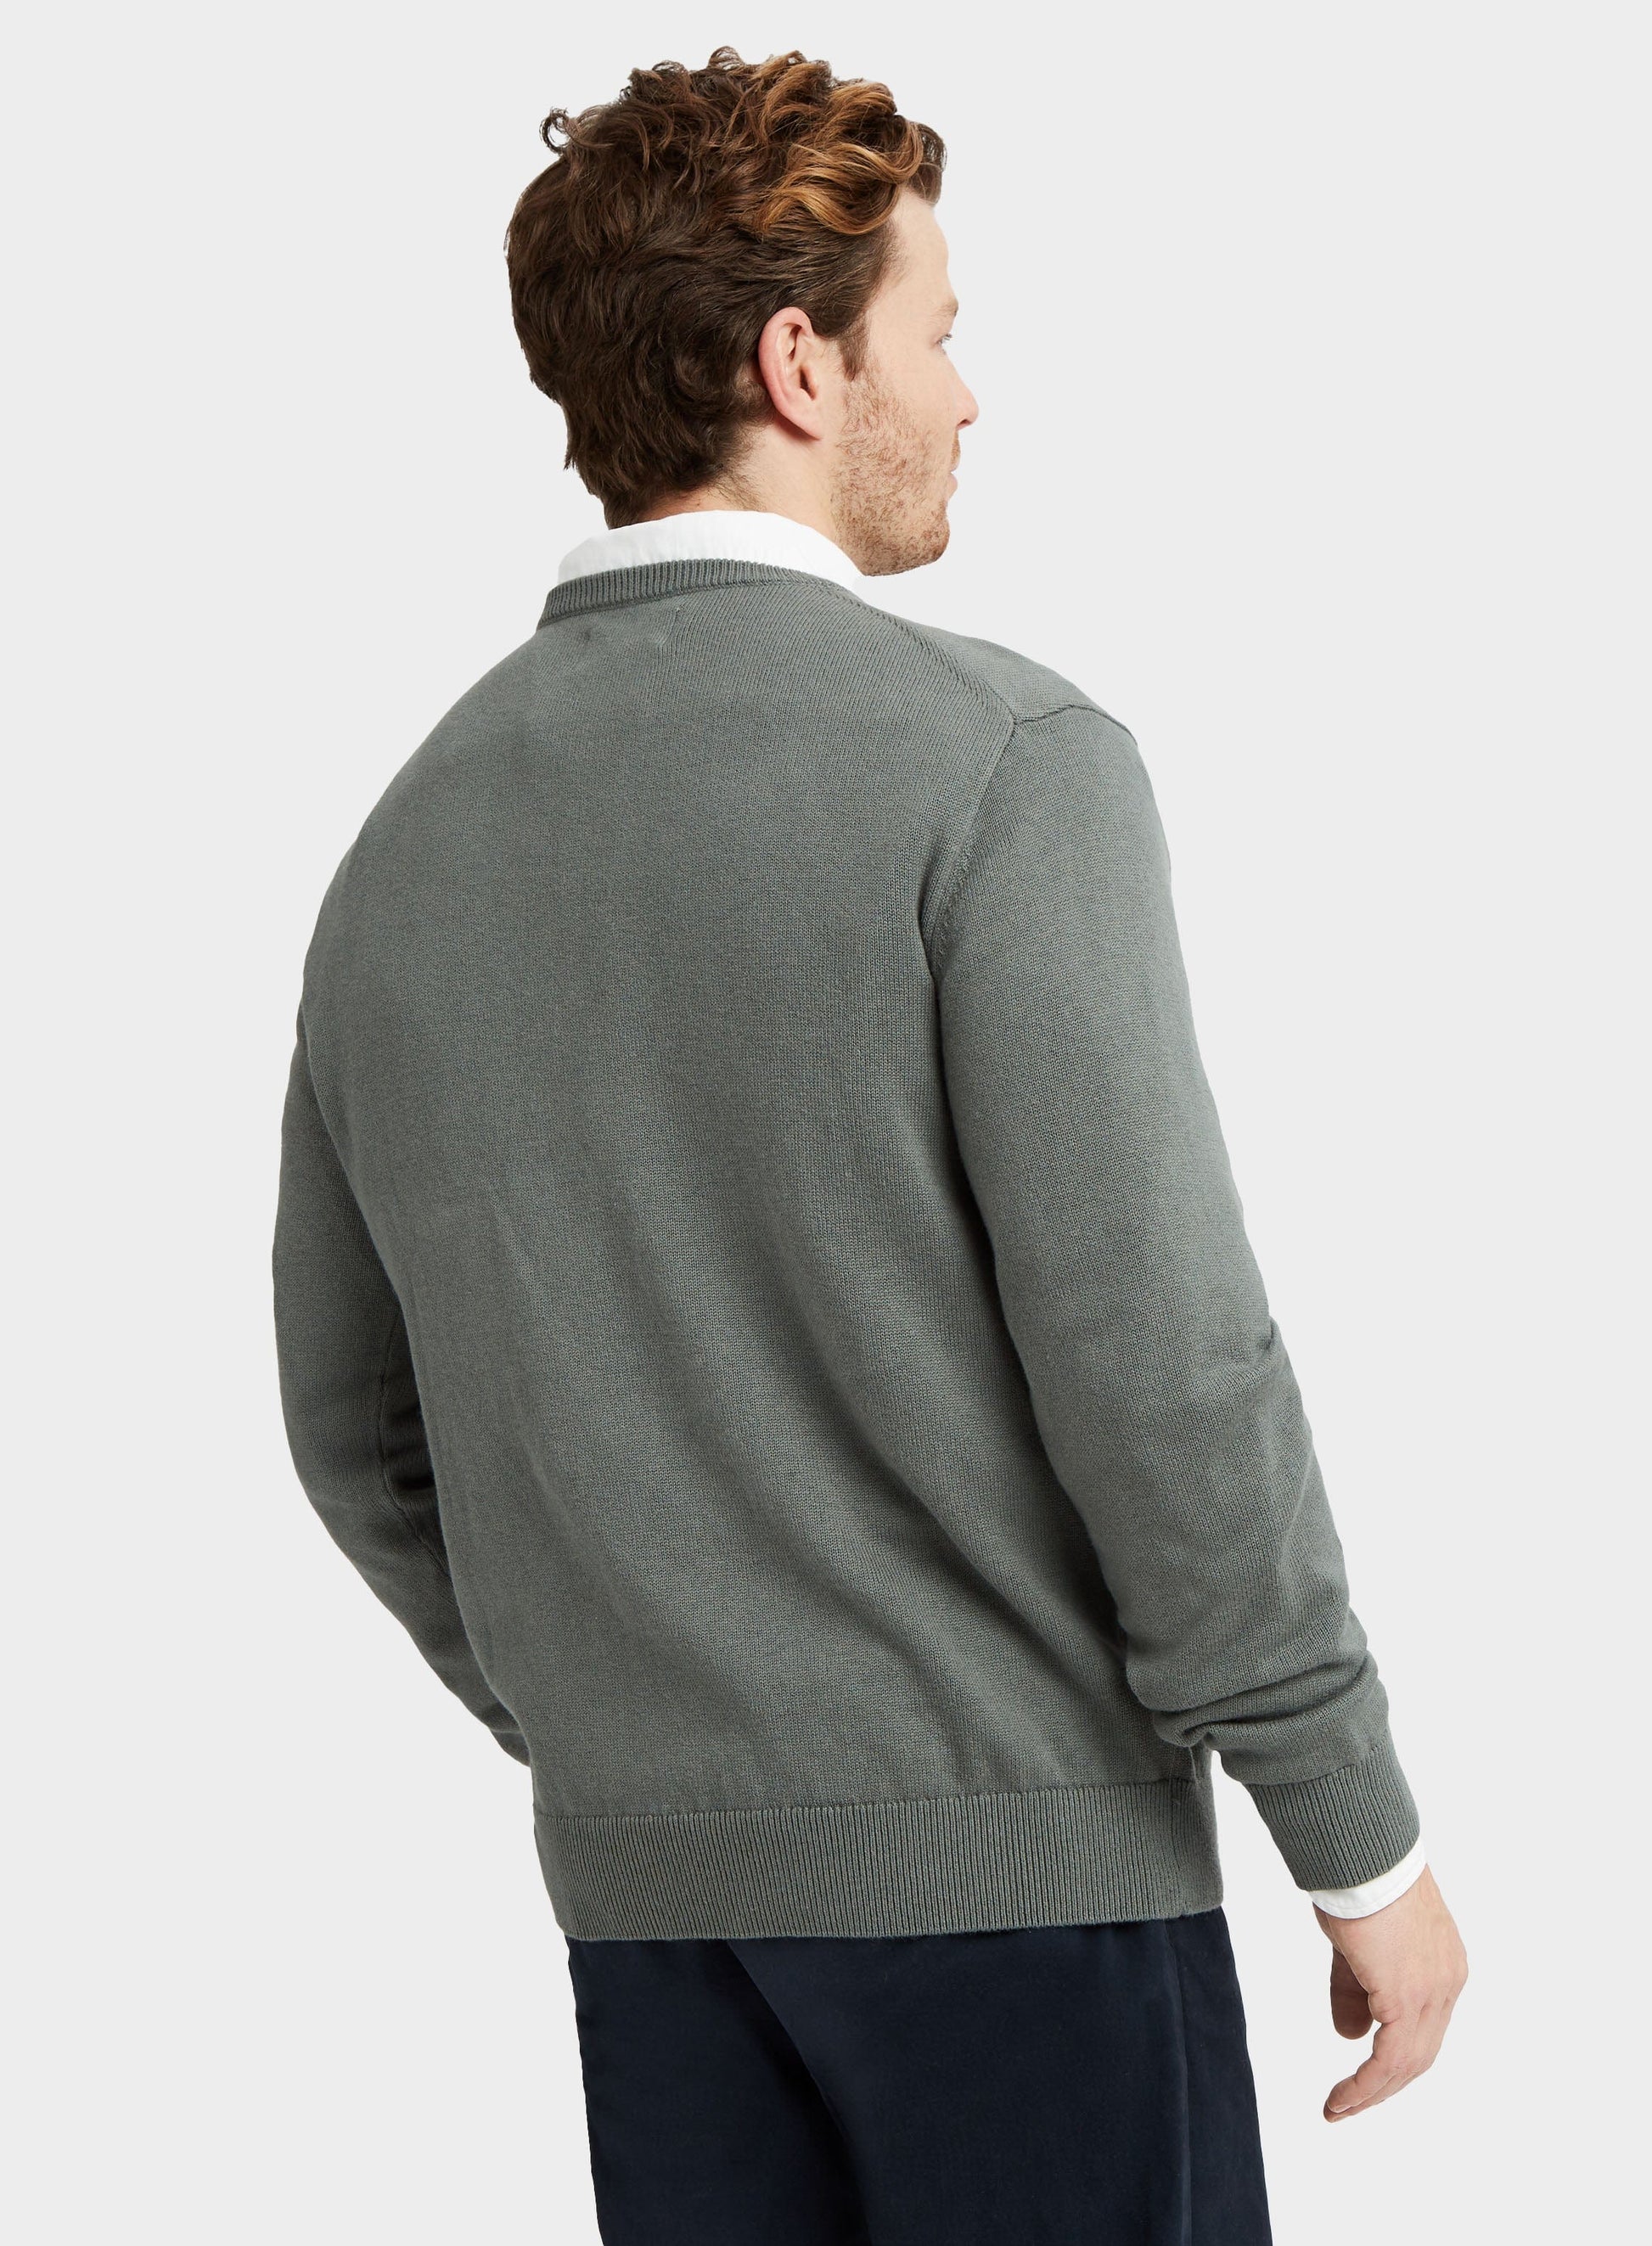 Mens Cotton Cashmere Crew Neck Jumper in Moss - Oxford Shirt Co. S